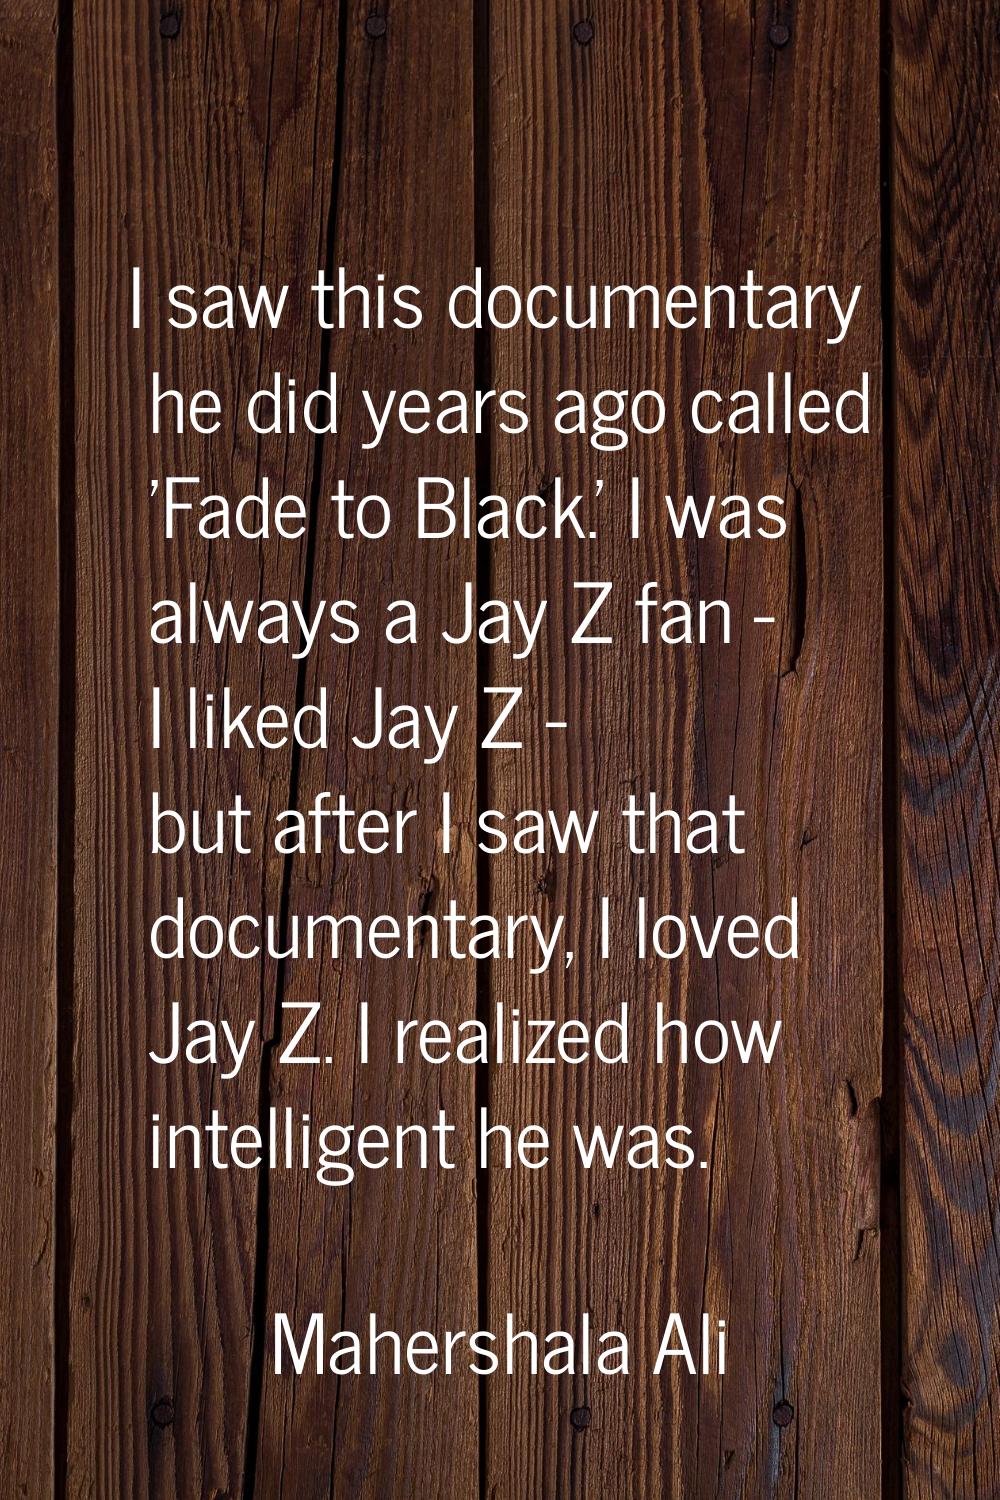 I saw this documentary he did years ago called 'Fade to Black.' I was always a Jay Z fan - I liked 